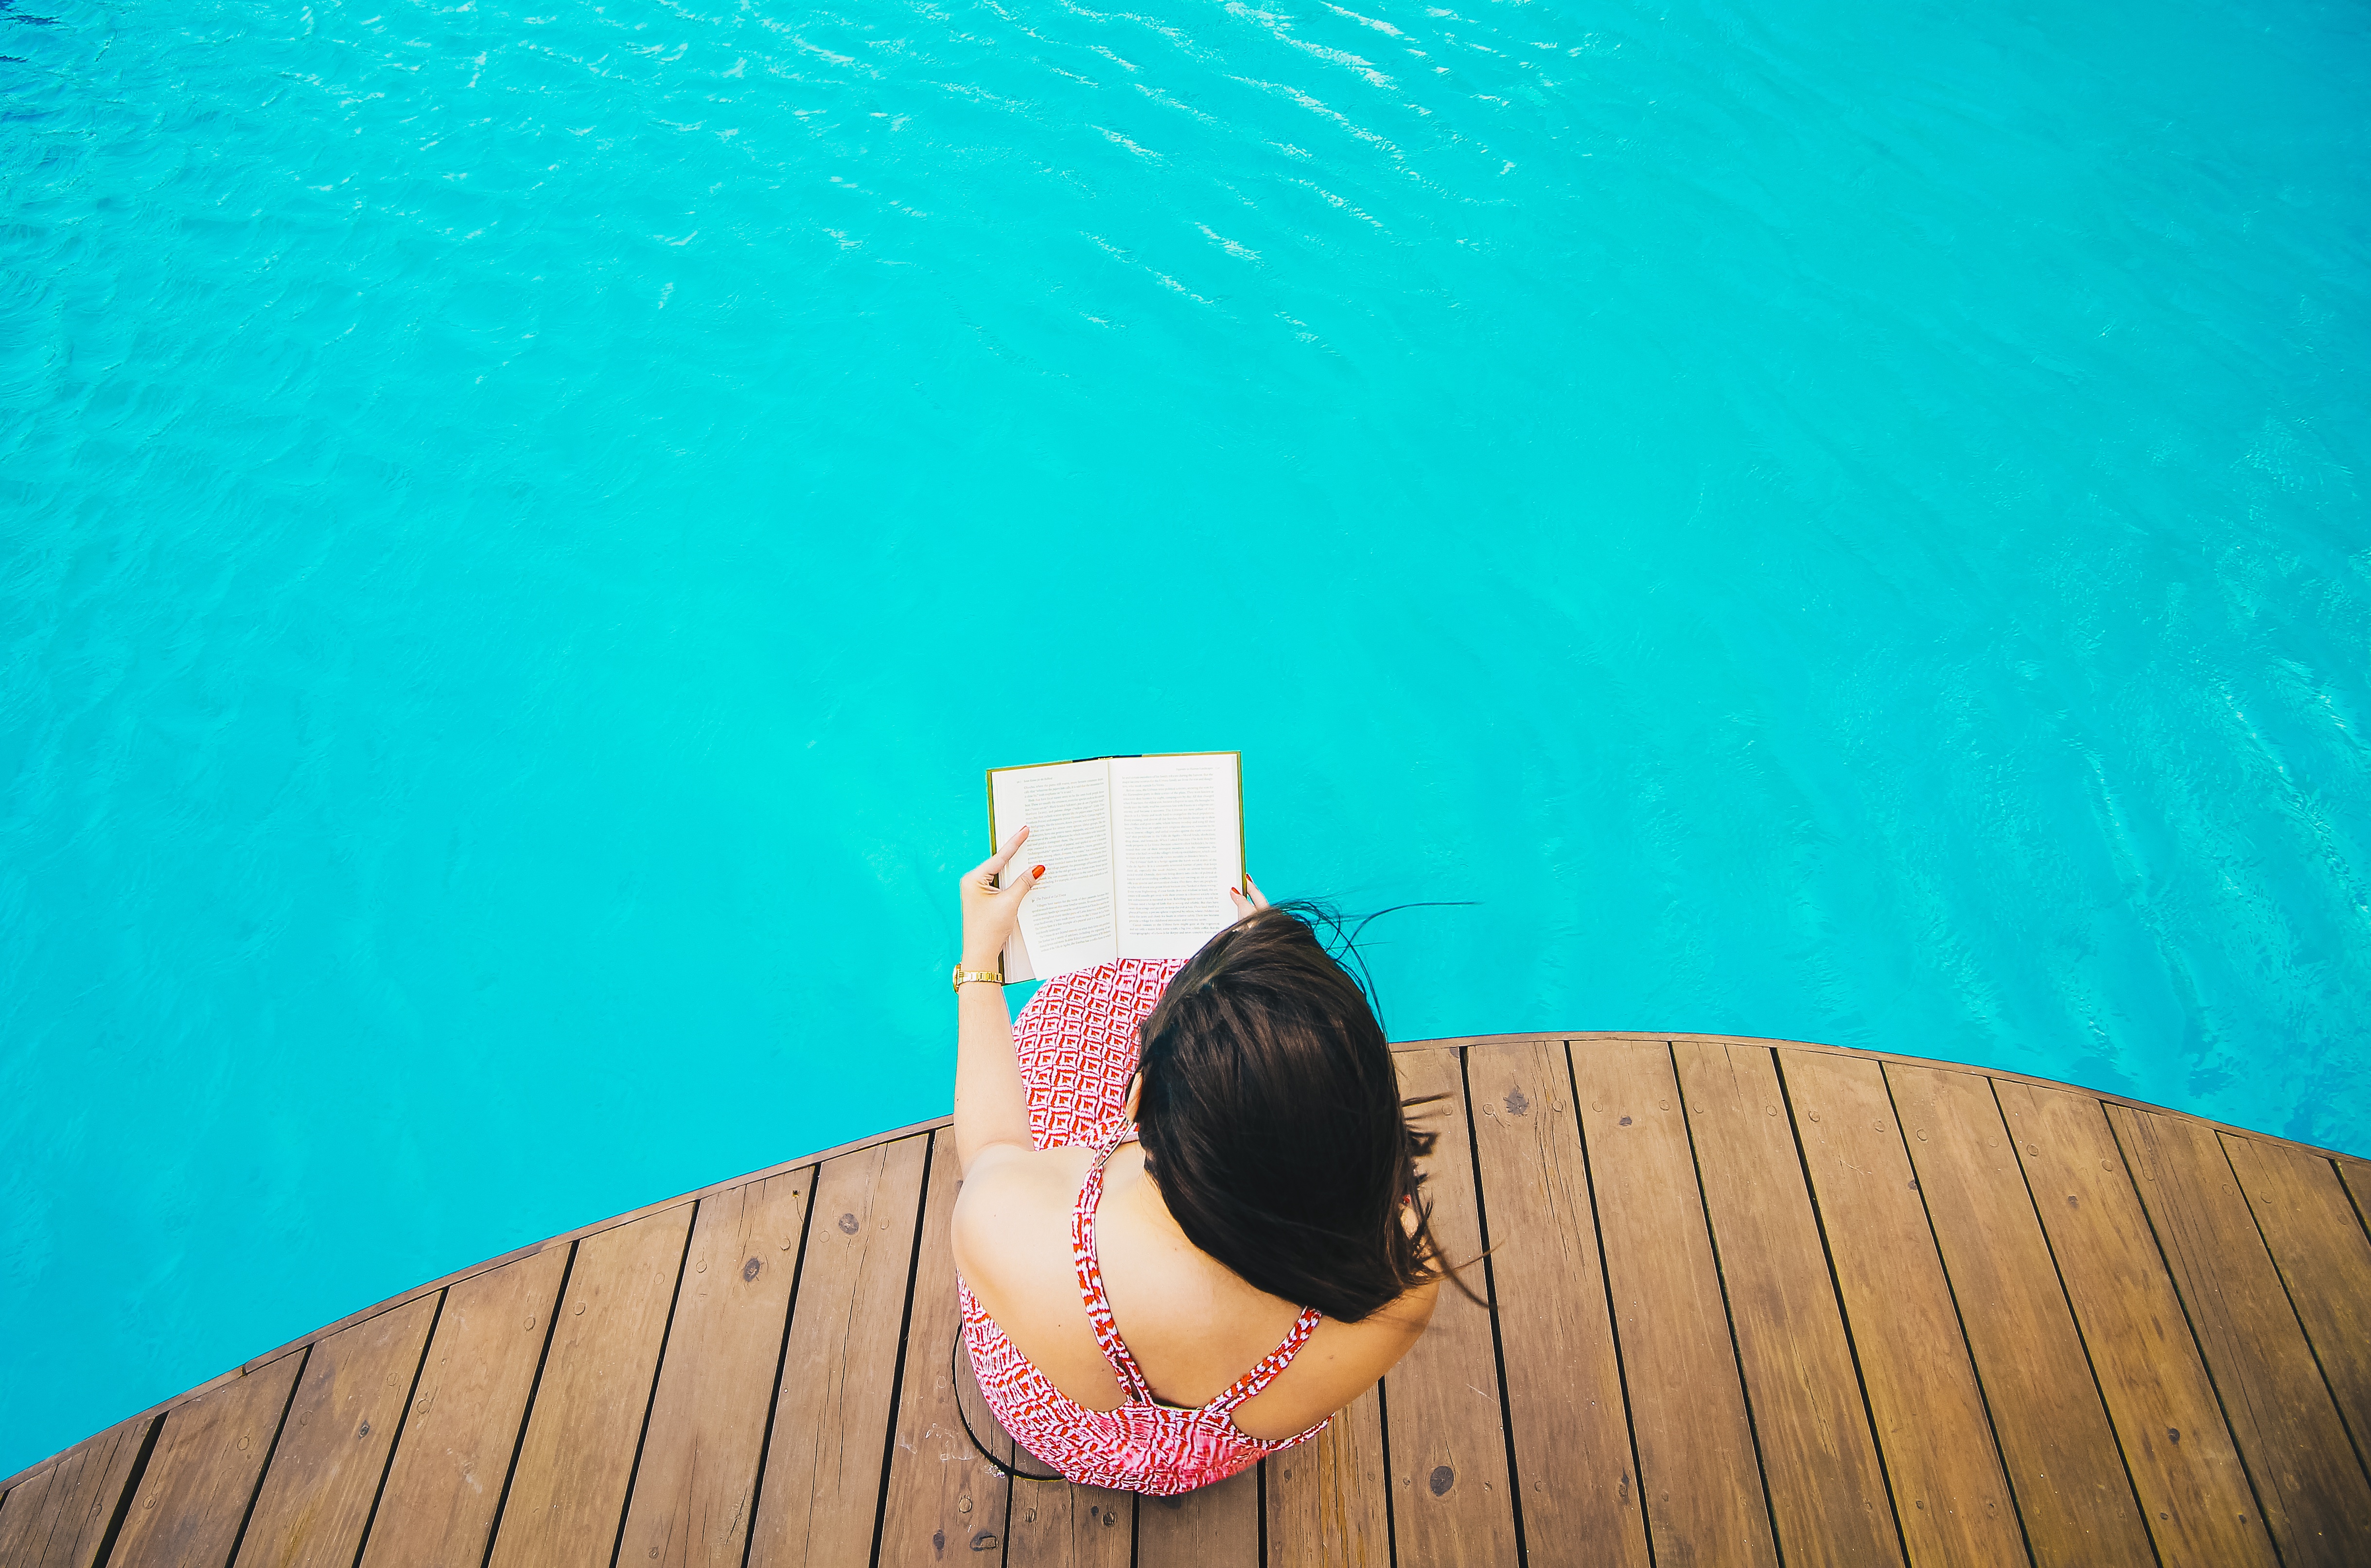 A person reading a book in the pool